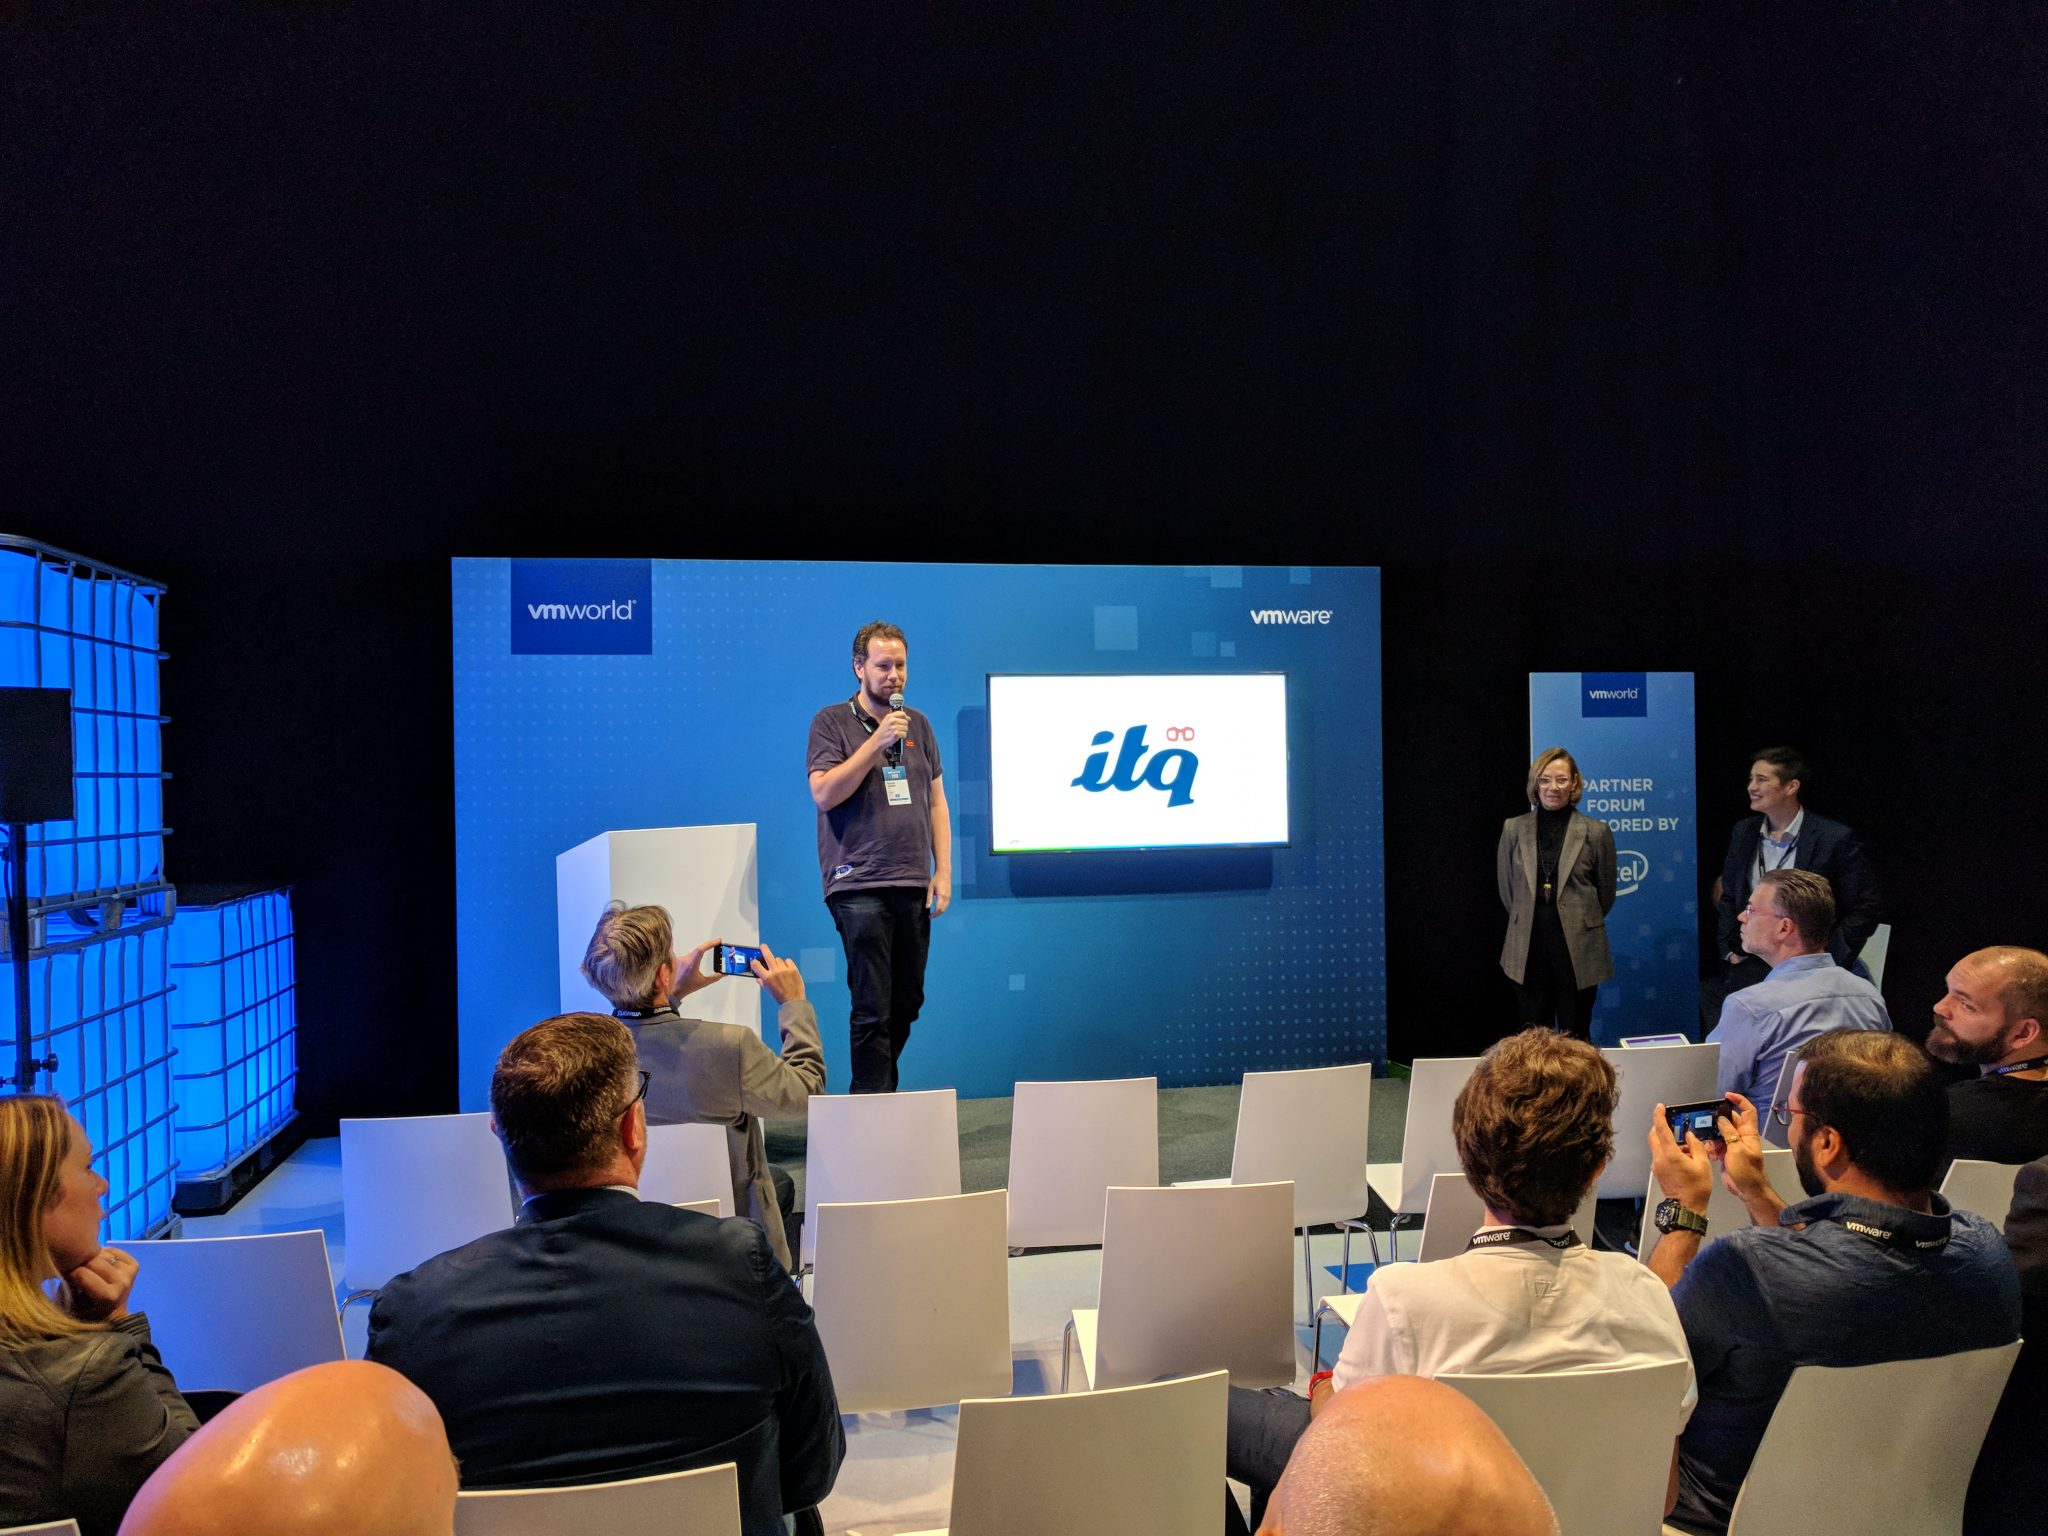 VMworld 2018 EU - Ruurd Keizer Sharing Experience about using VMware Pivotal Container Service (PKS)